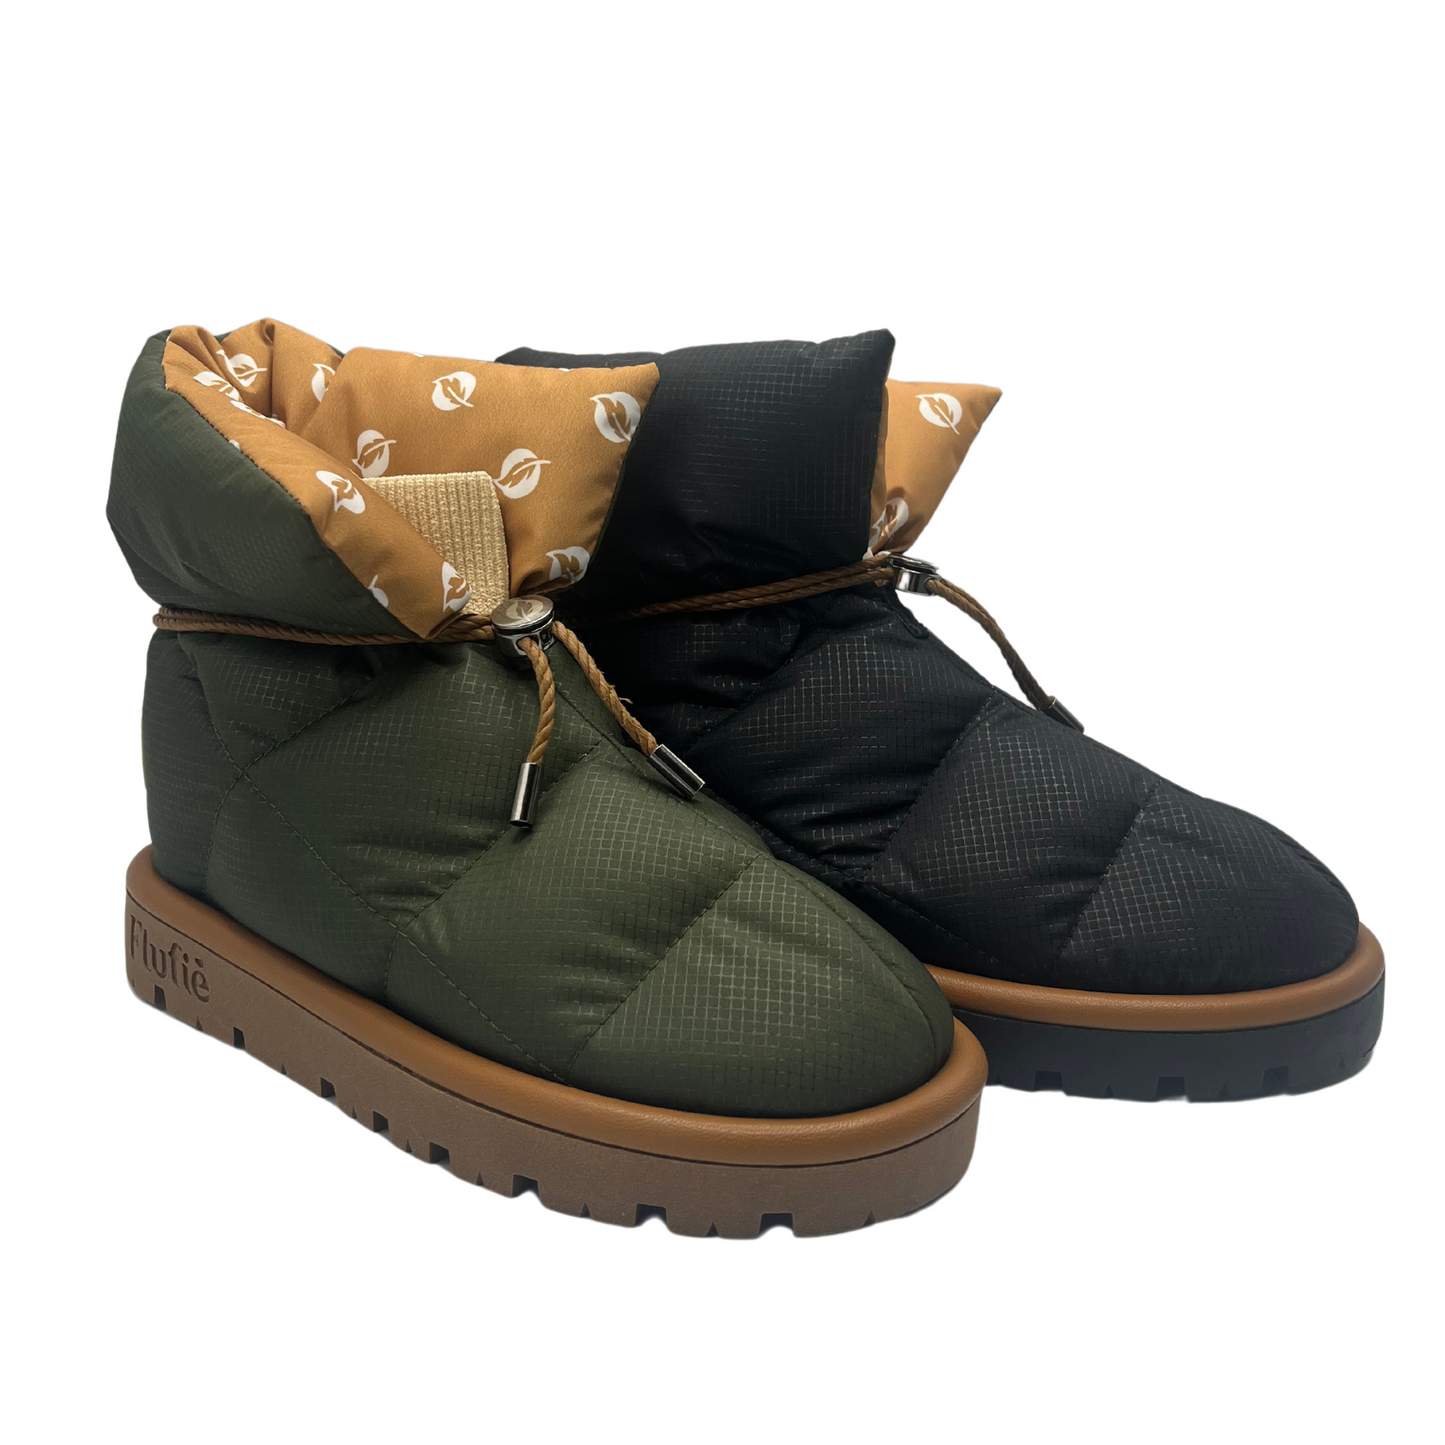 Angled view of a pair of puffer style short boots. One is khaki and one is black. Both have drawstring closures